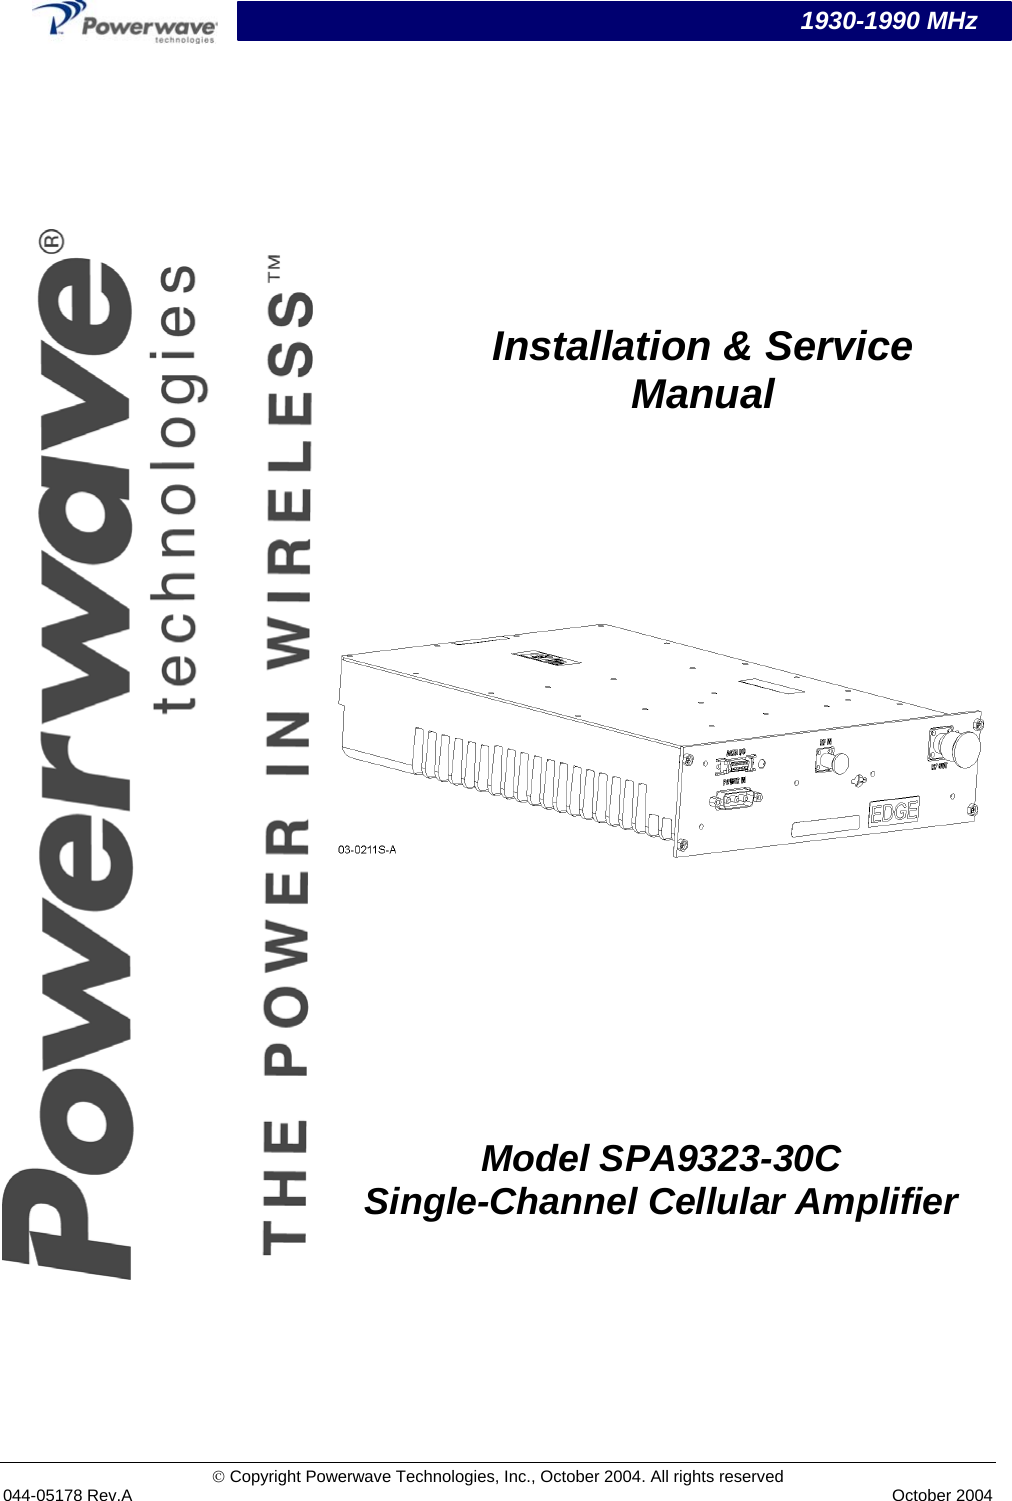   1930-1990 MHz © Copyright Powerwave Technologies, Inc., October 2004. All rights reserved 044-05178 Rev.A October 2004                     Model SPA9323-30C Single-Channel Cellular Amplifier Installation &amp; Service Manual 